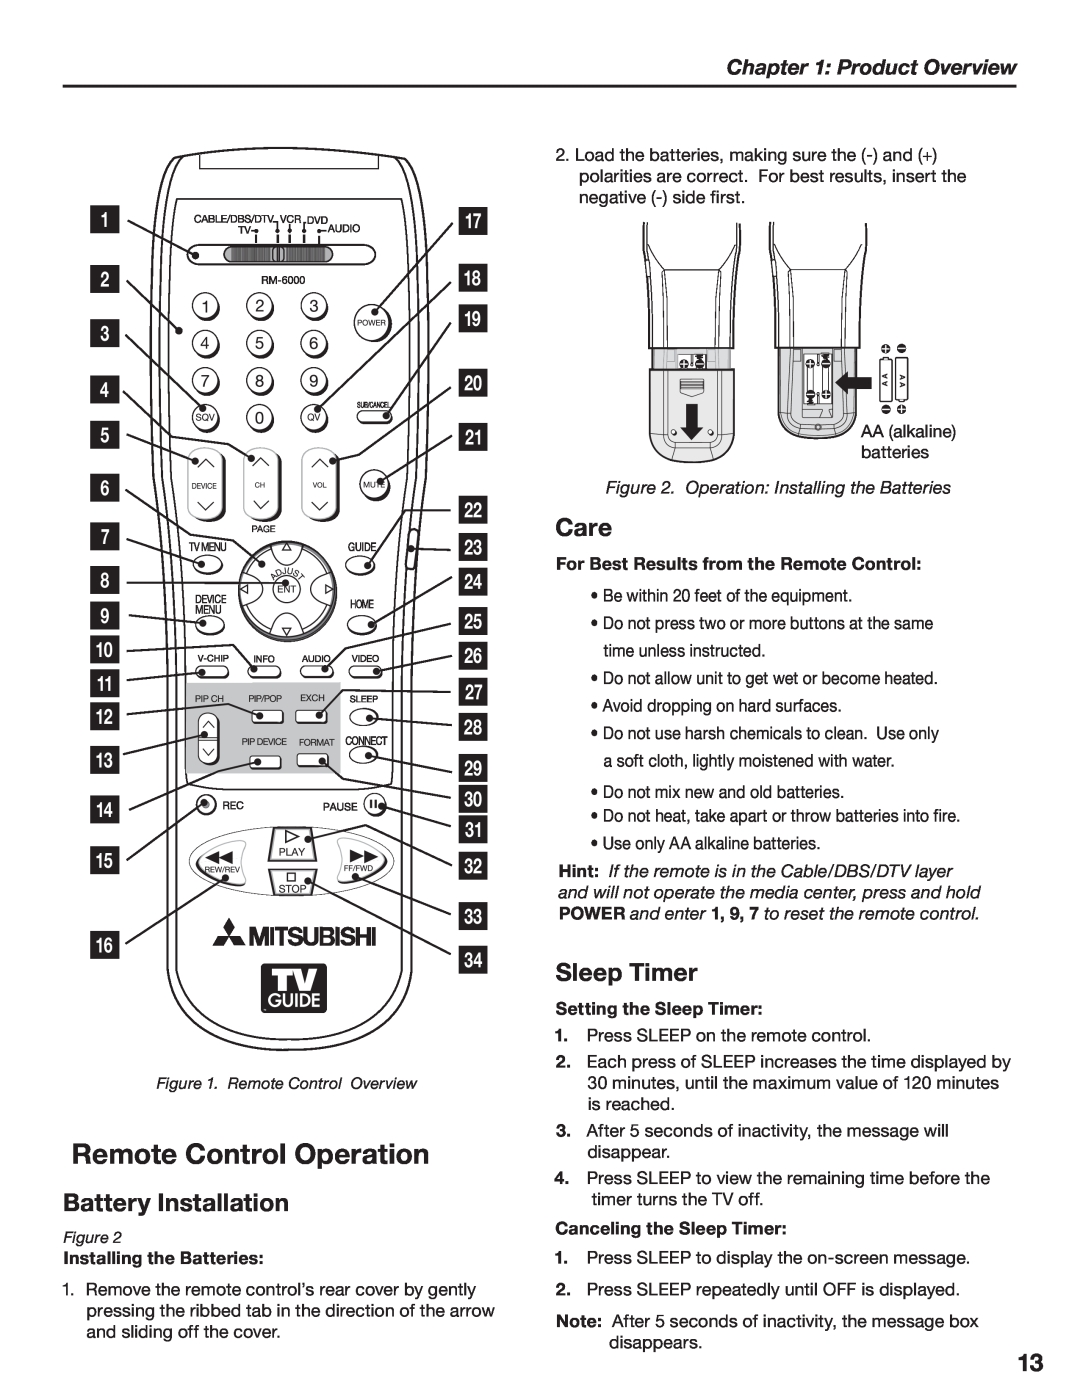 Mitsubishi Electronics LT-3780, LT-3280 manual Remote Control Operation, Product Overview, Installing the Batteries 